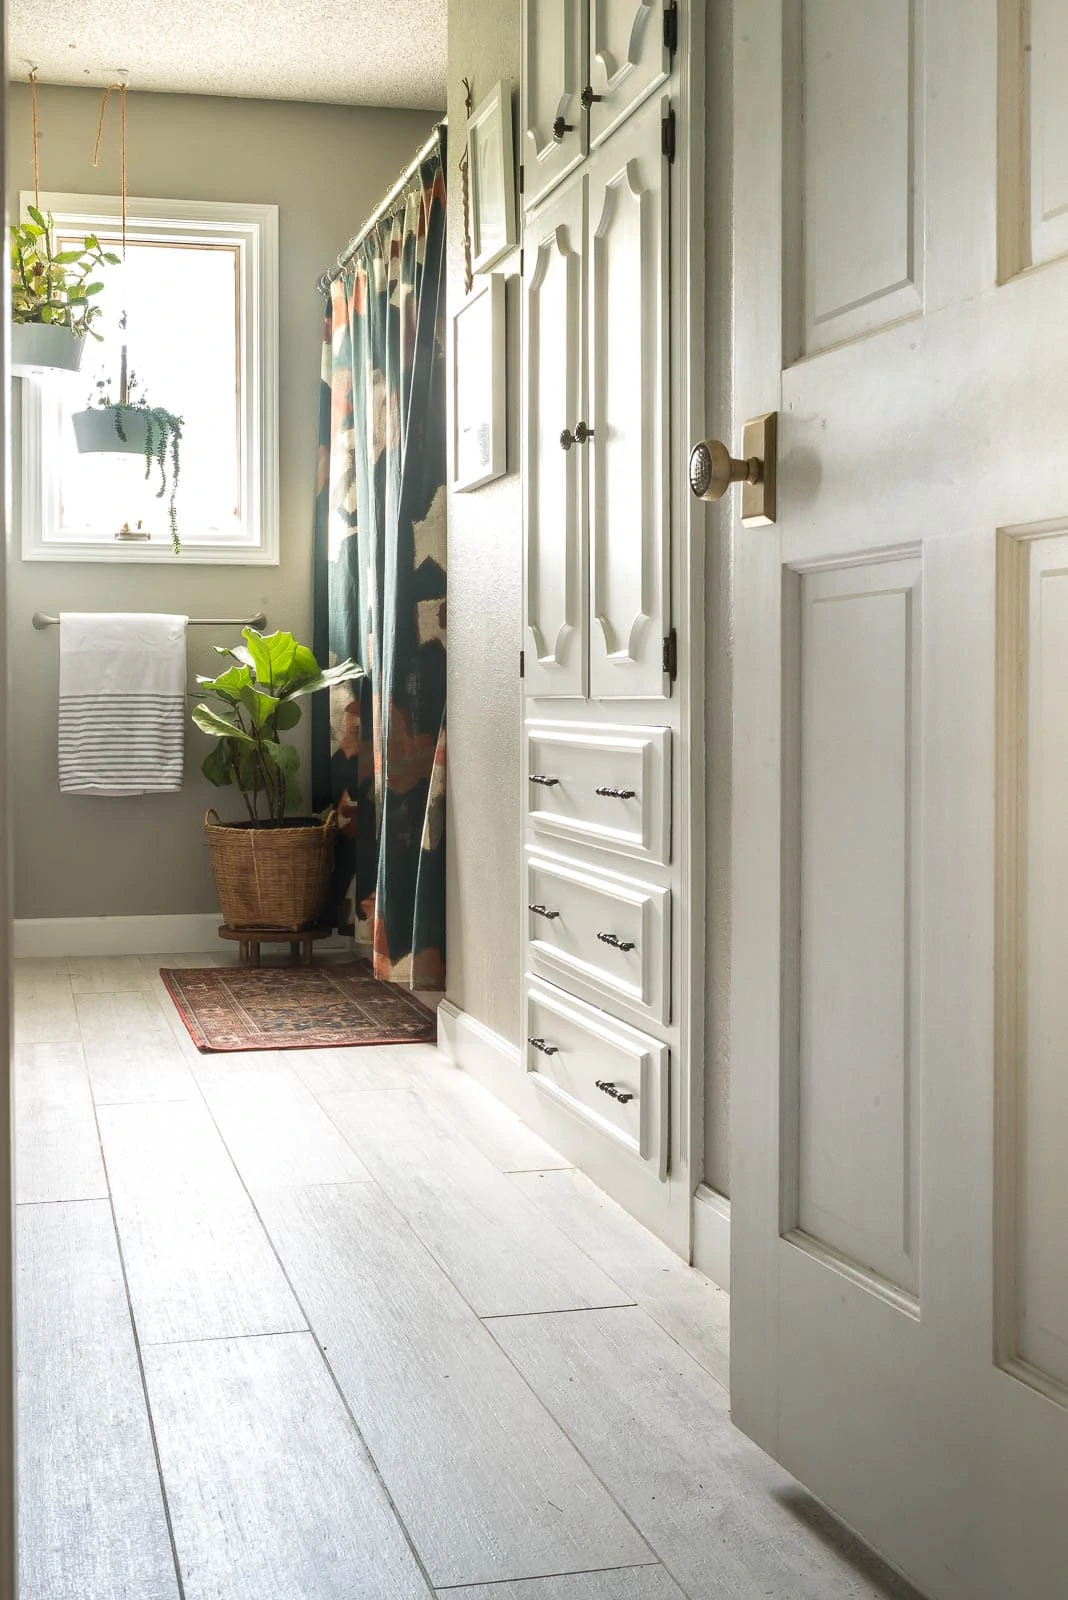 All about bathroom storage and organization 